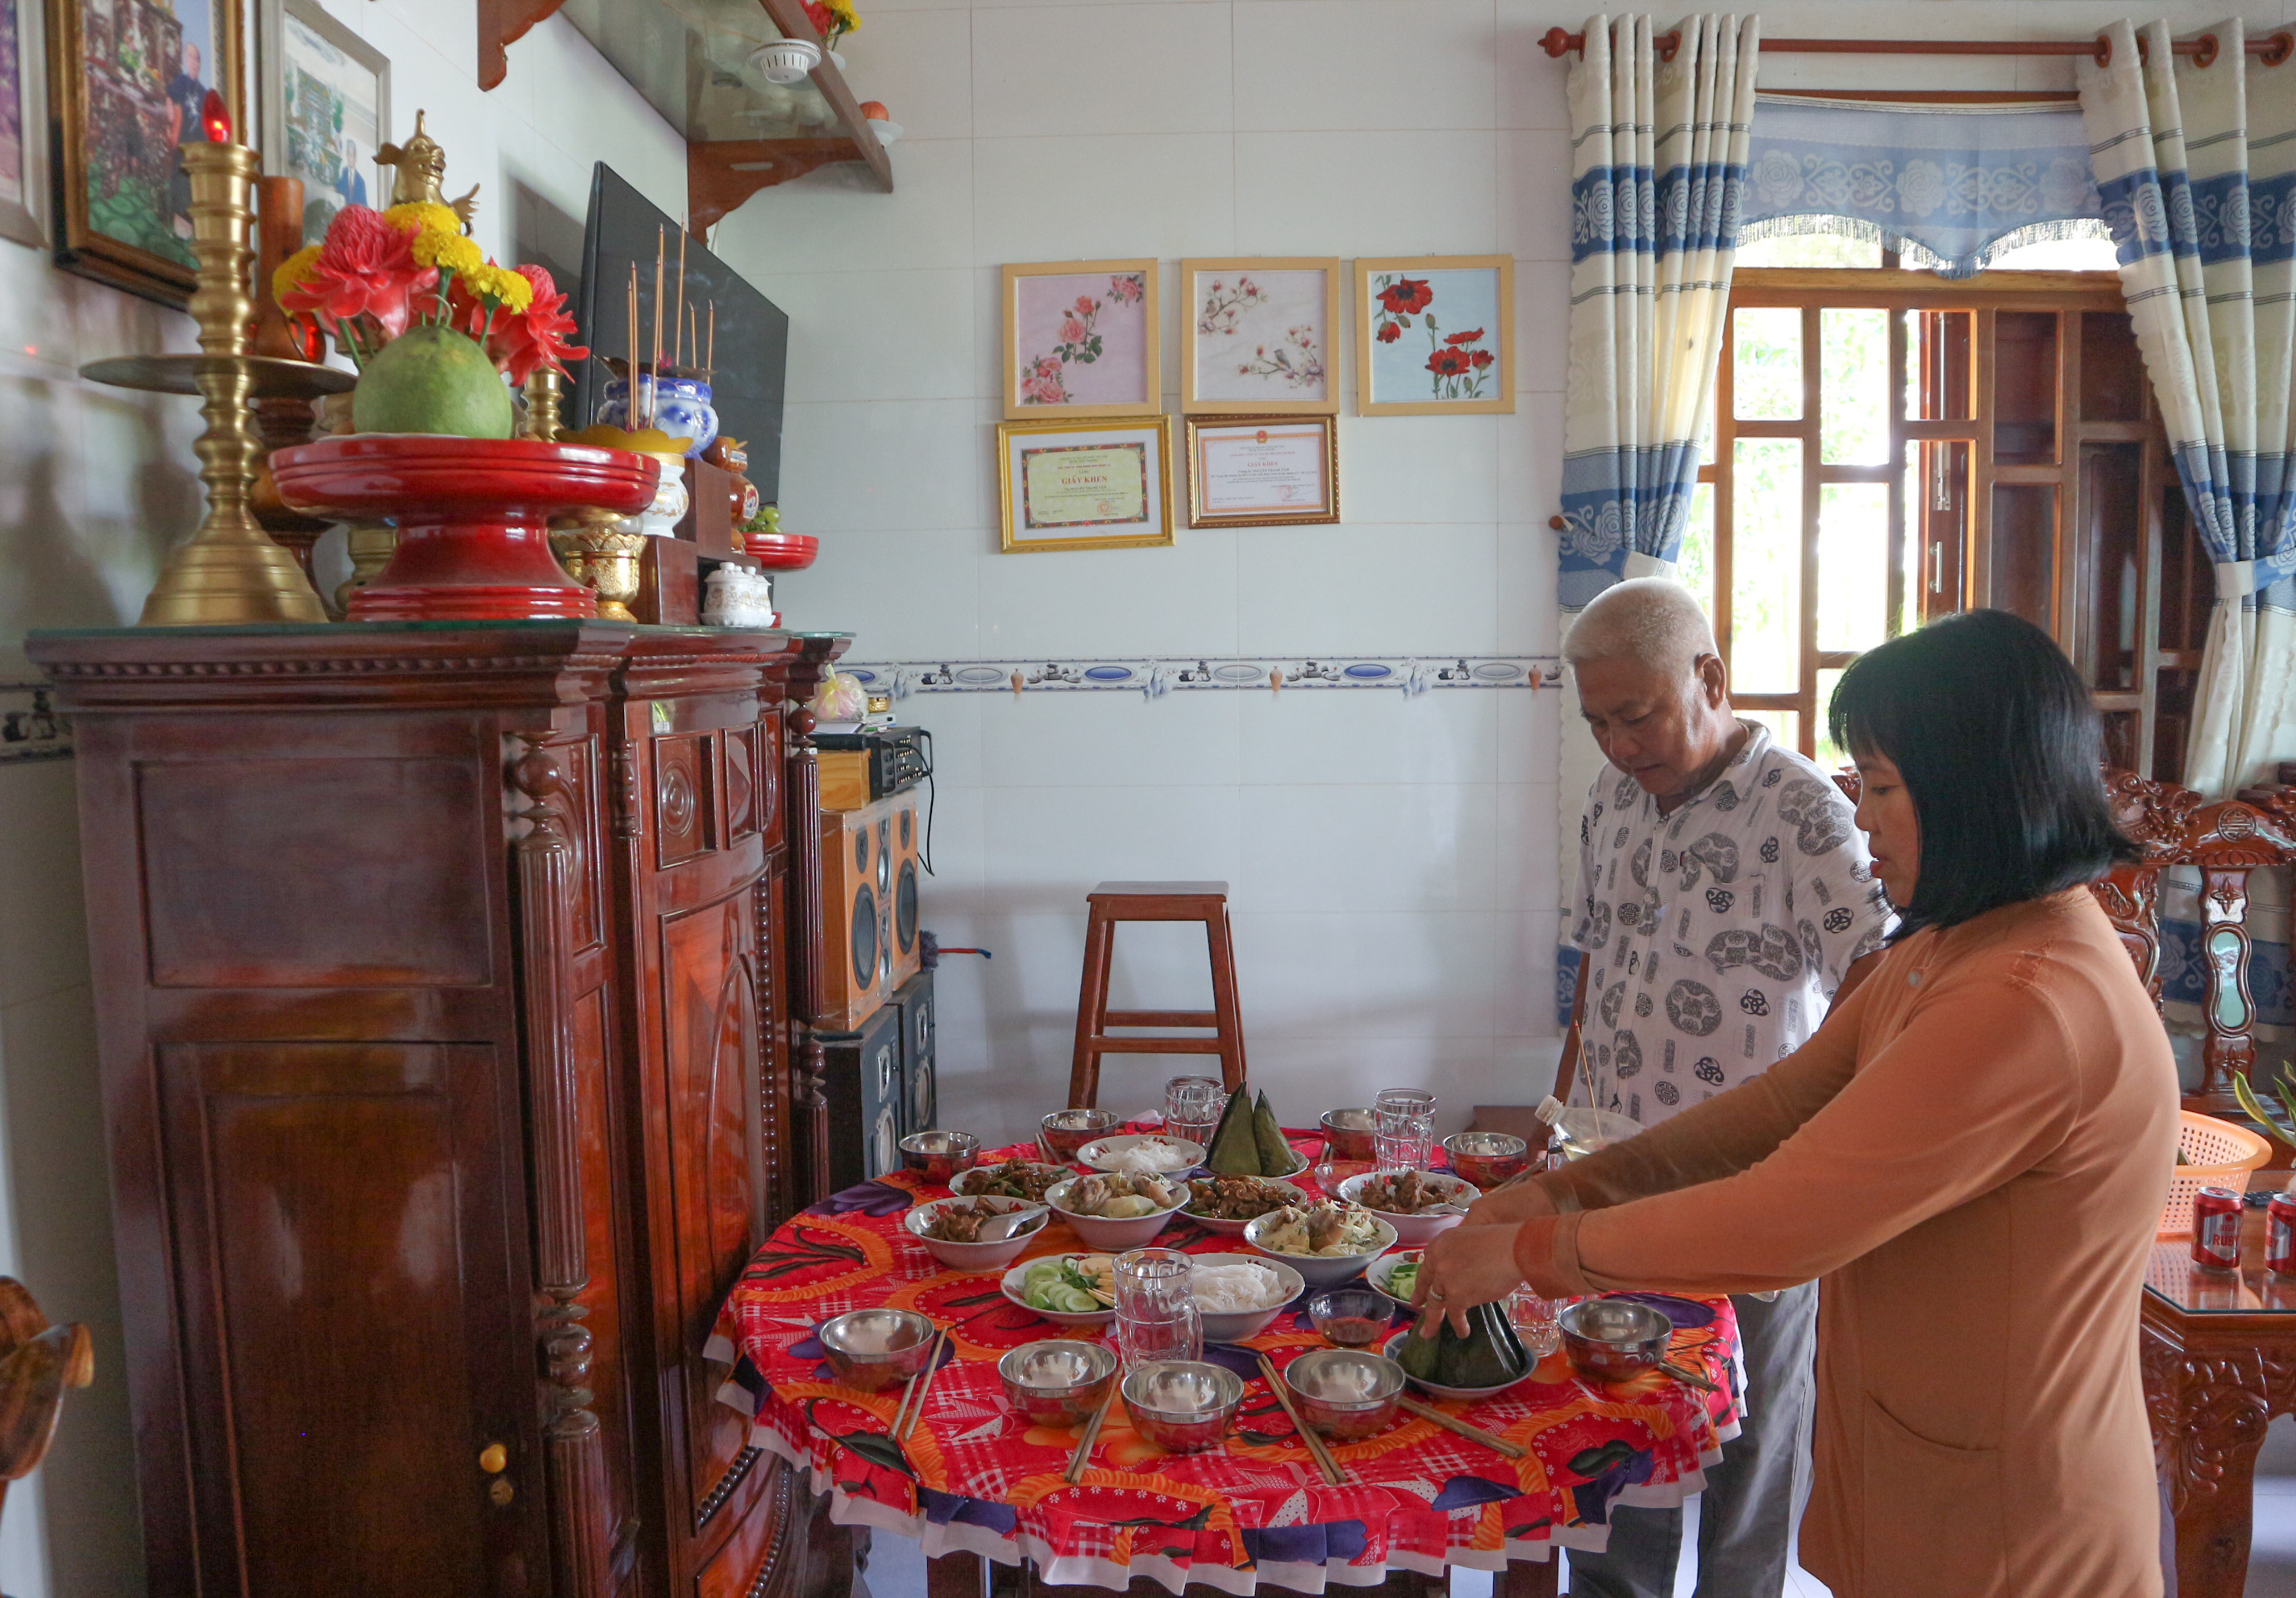 Nguyen Thi Kim Lan and her husband, Nguyen Van Phung, serve 'banh it' as an offering during their father’s death anniversary at their house at My Ngai Communes, Cao Lanh City, Dong Thap Province. Photo: Ngoc Phuong / Tuoi Tre News.